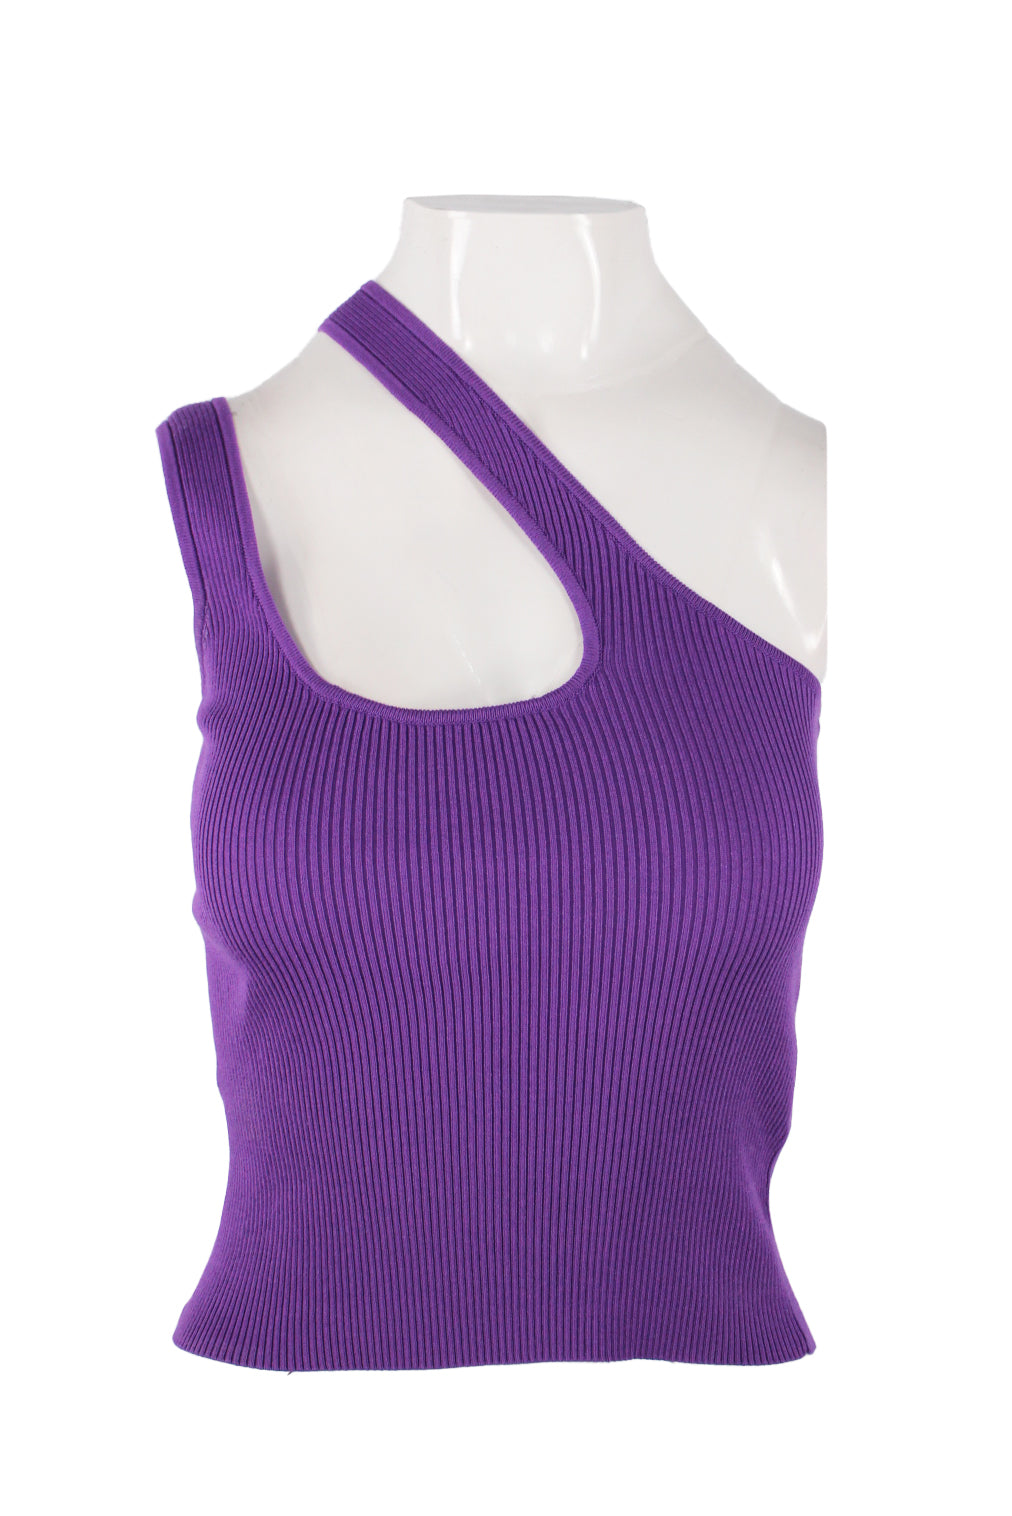 description: na-kd purple asymmetric knitted ribbed tank top. features assymetrical strap, fitted style, and cropped silhouette. 